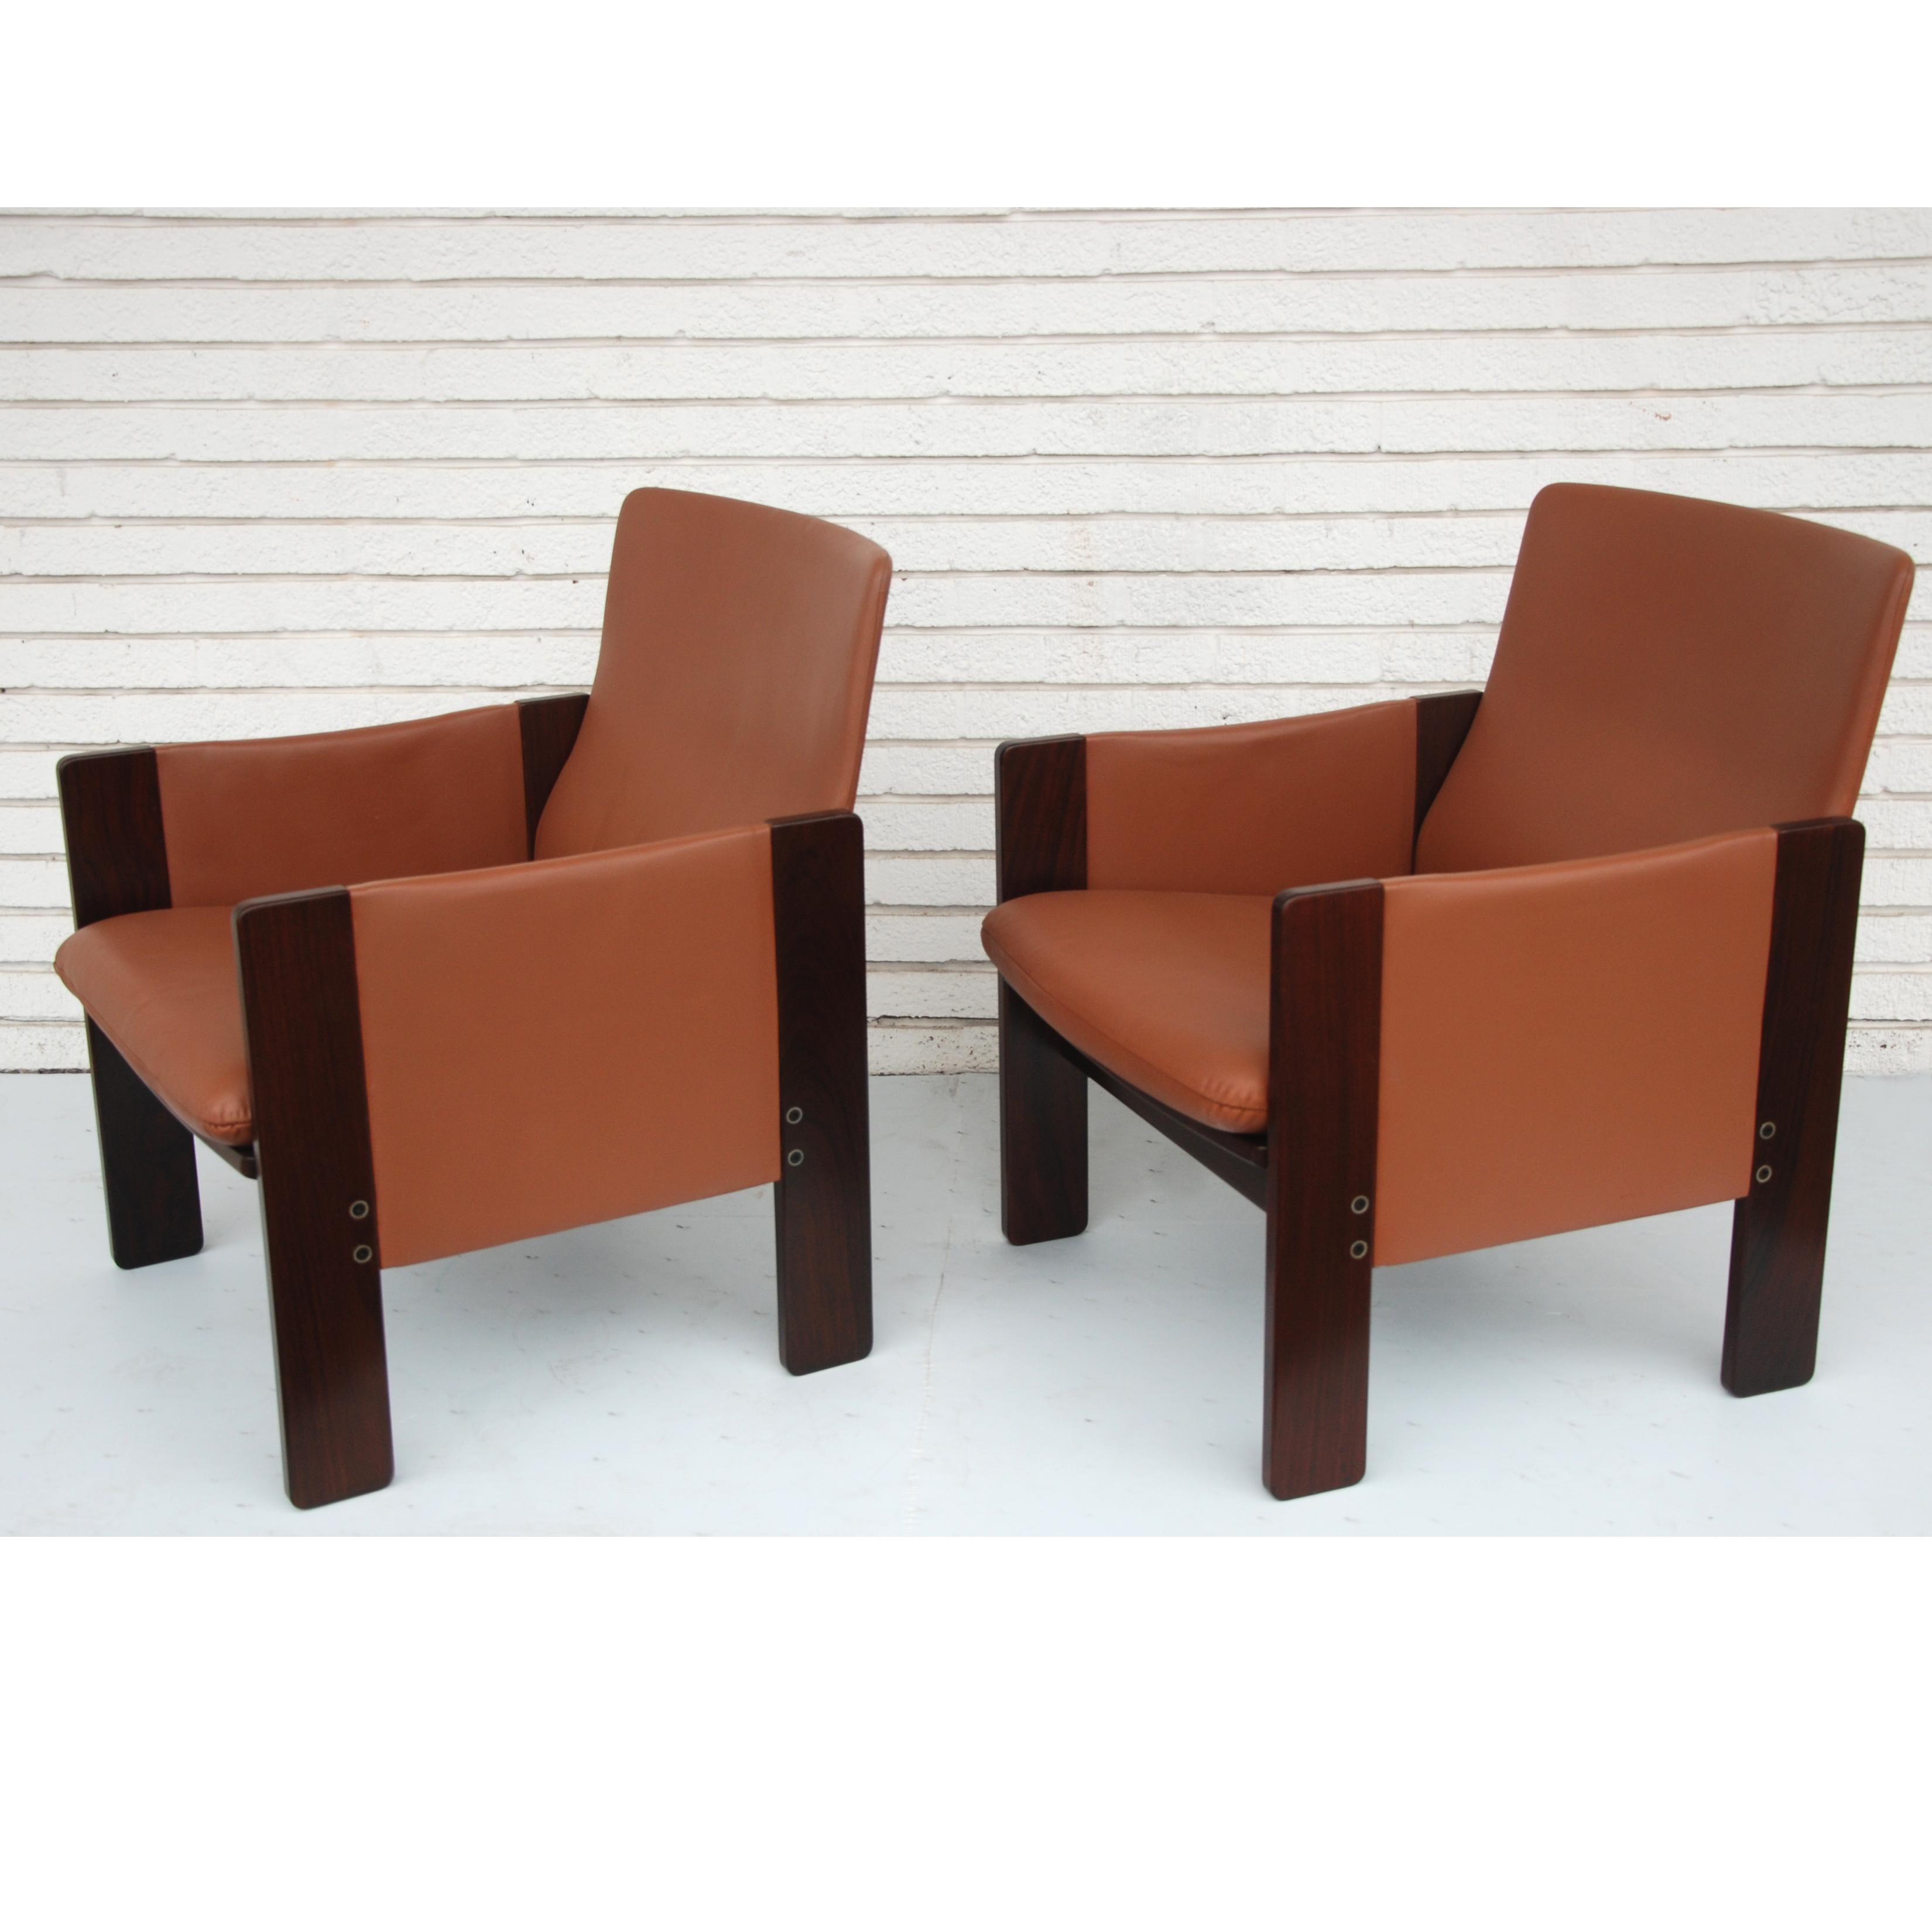 Mid-Century Modern Tobia Scarpa for Cassina Rosewood and Leather Lounge Chairs